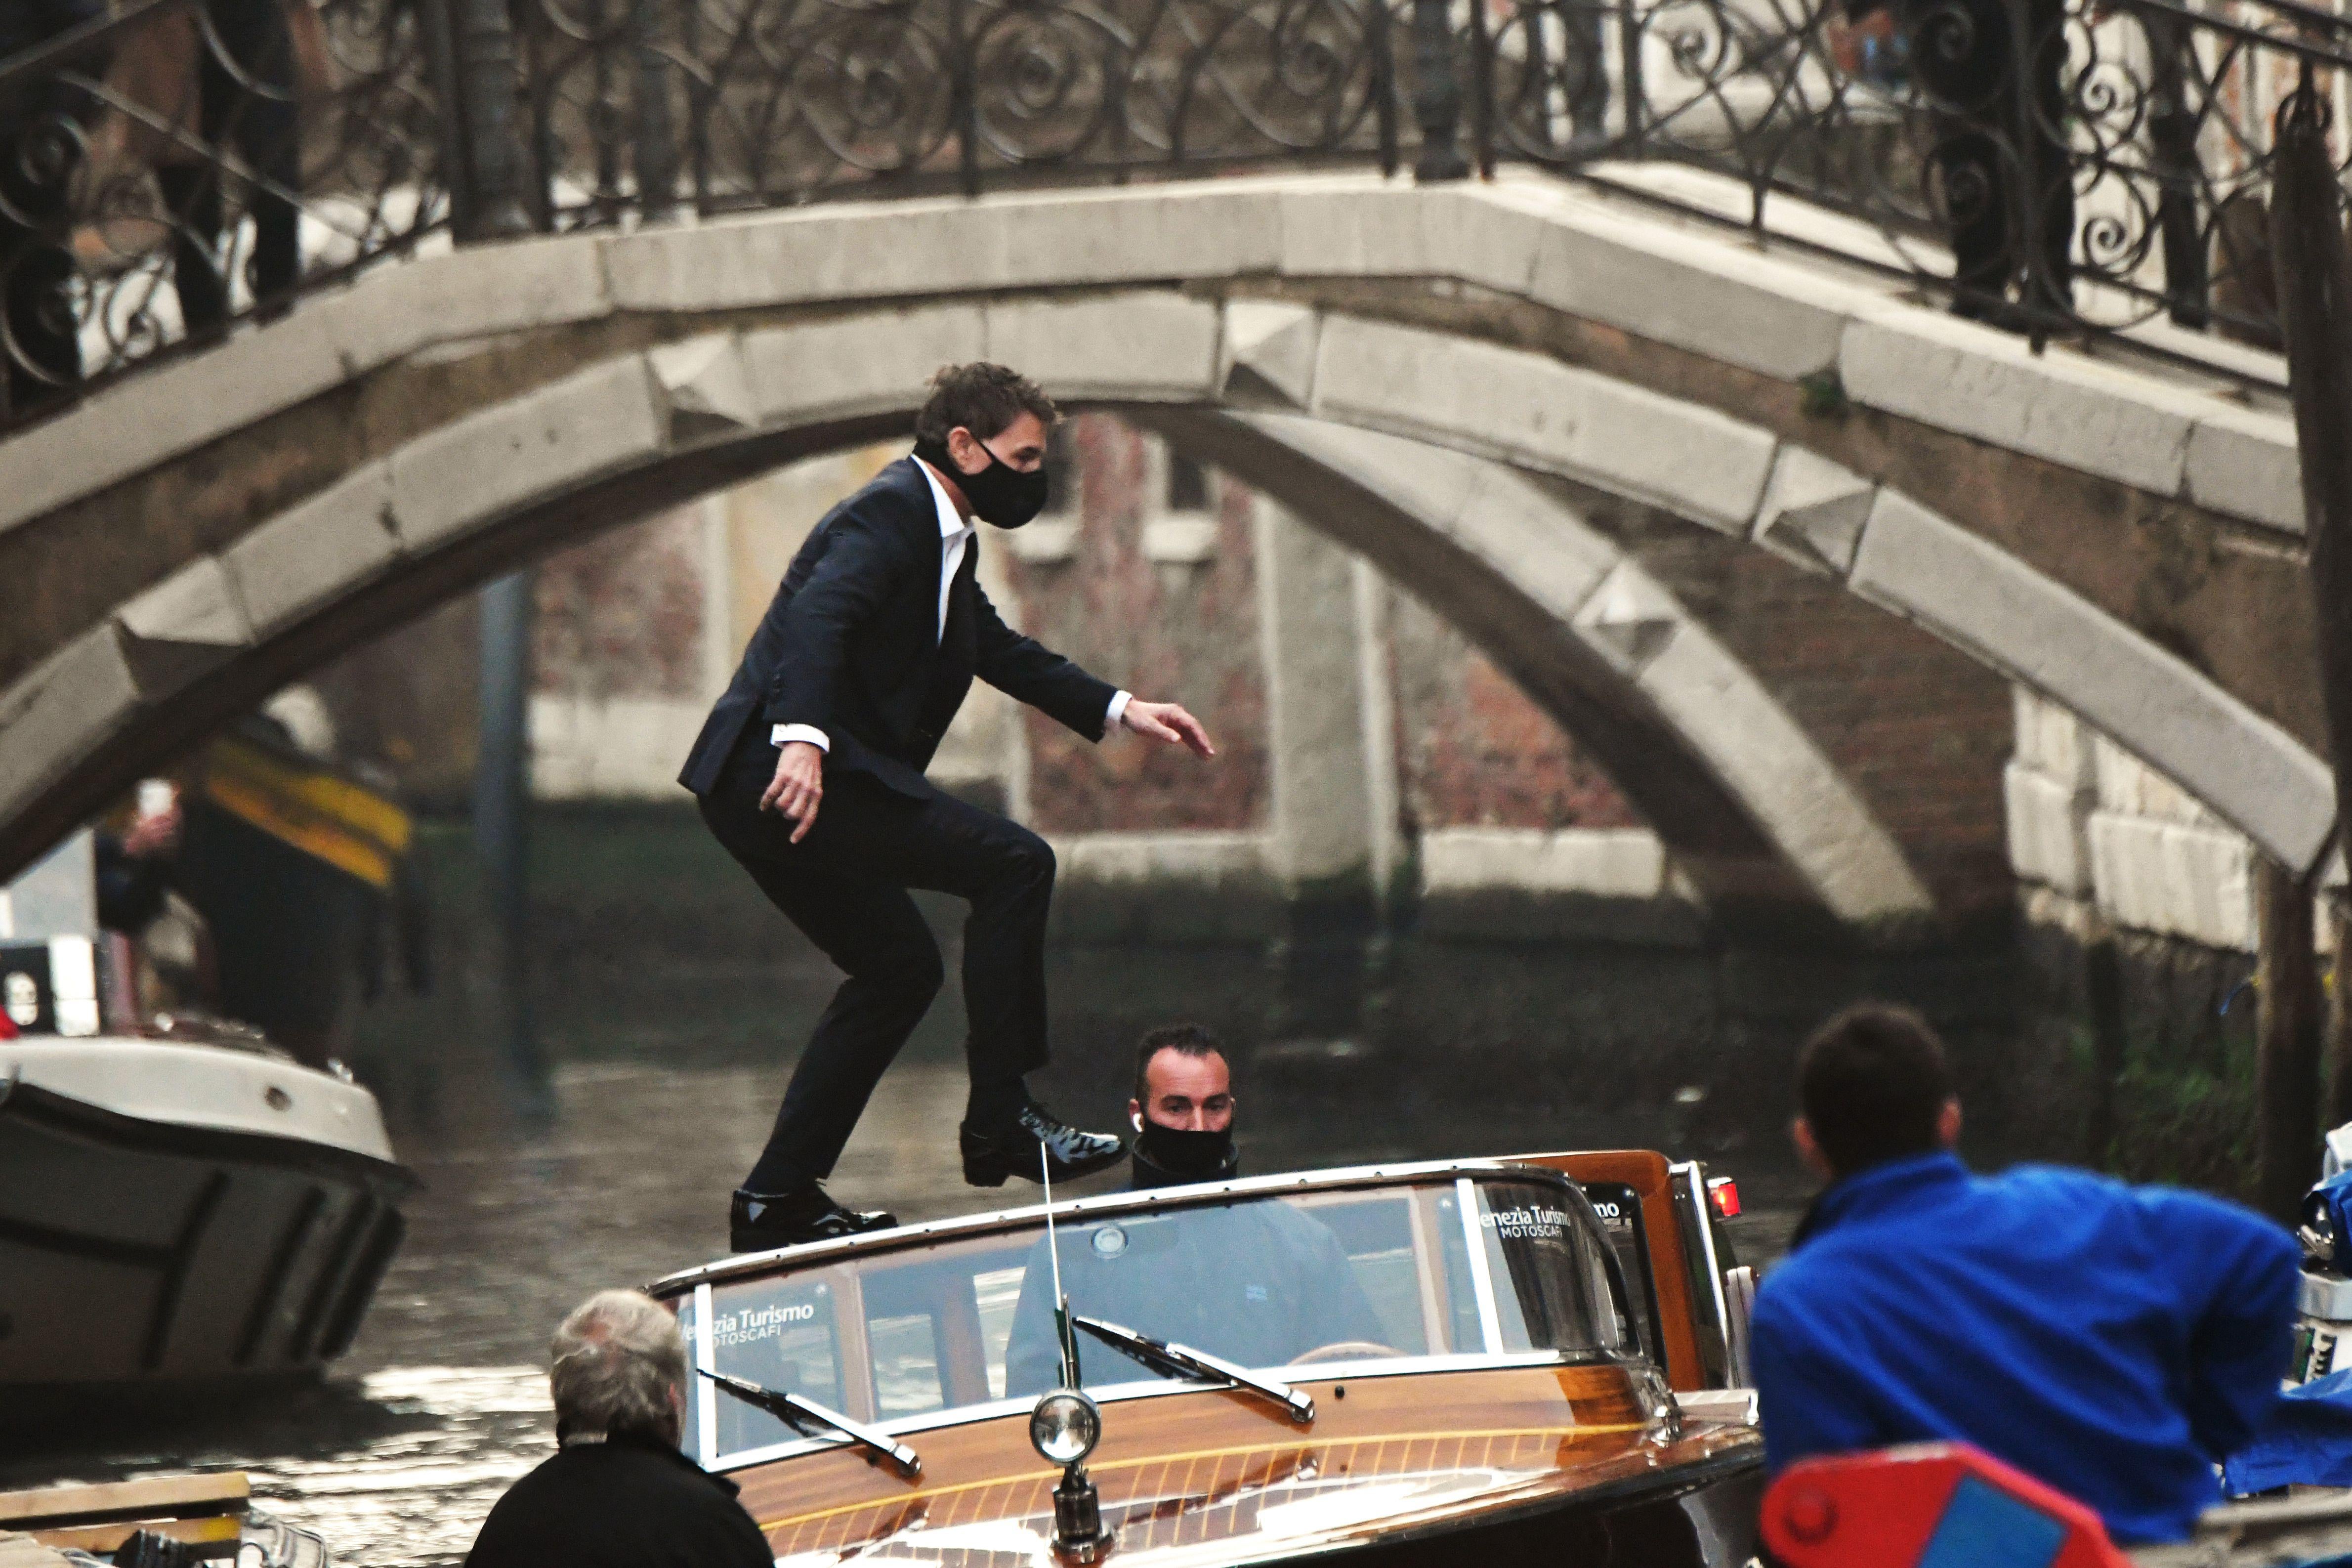 Tom Cruise, wearing a black mask, stands balancing on a taxi boat in a canal